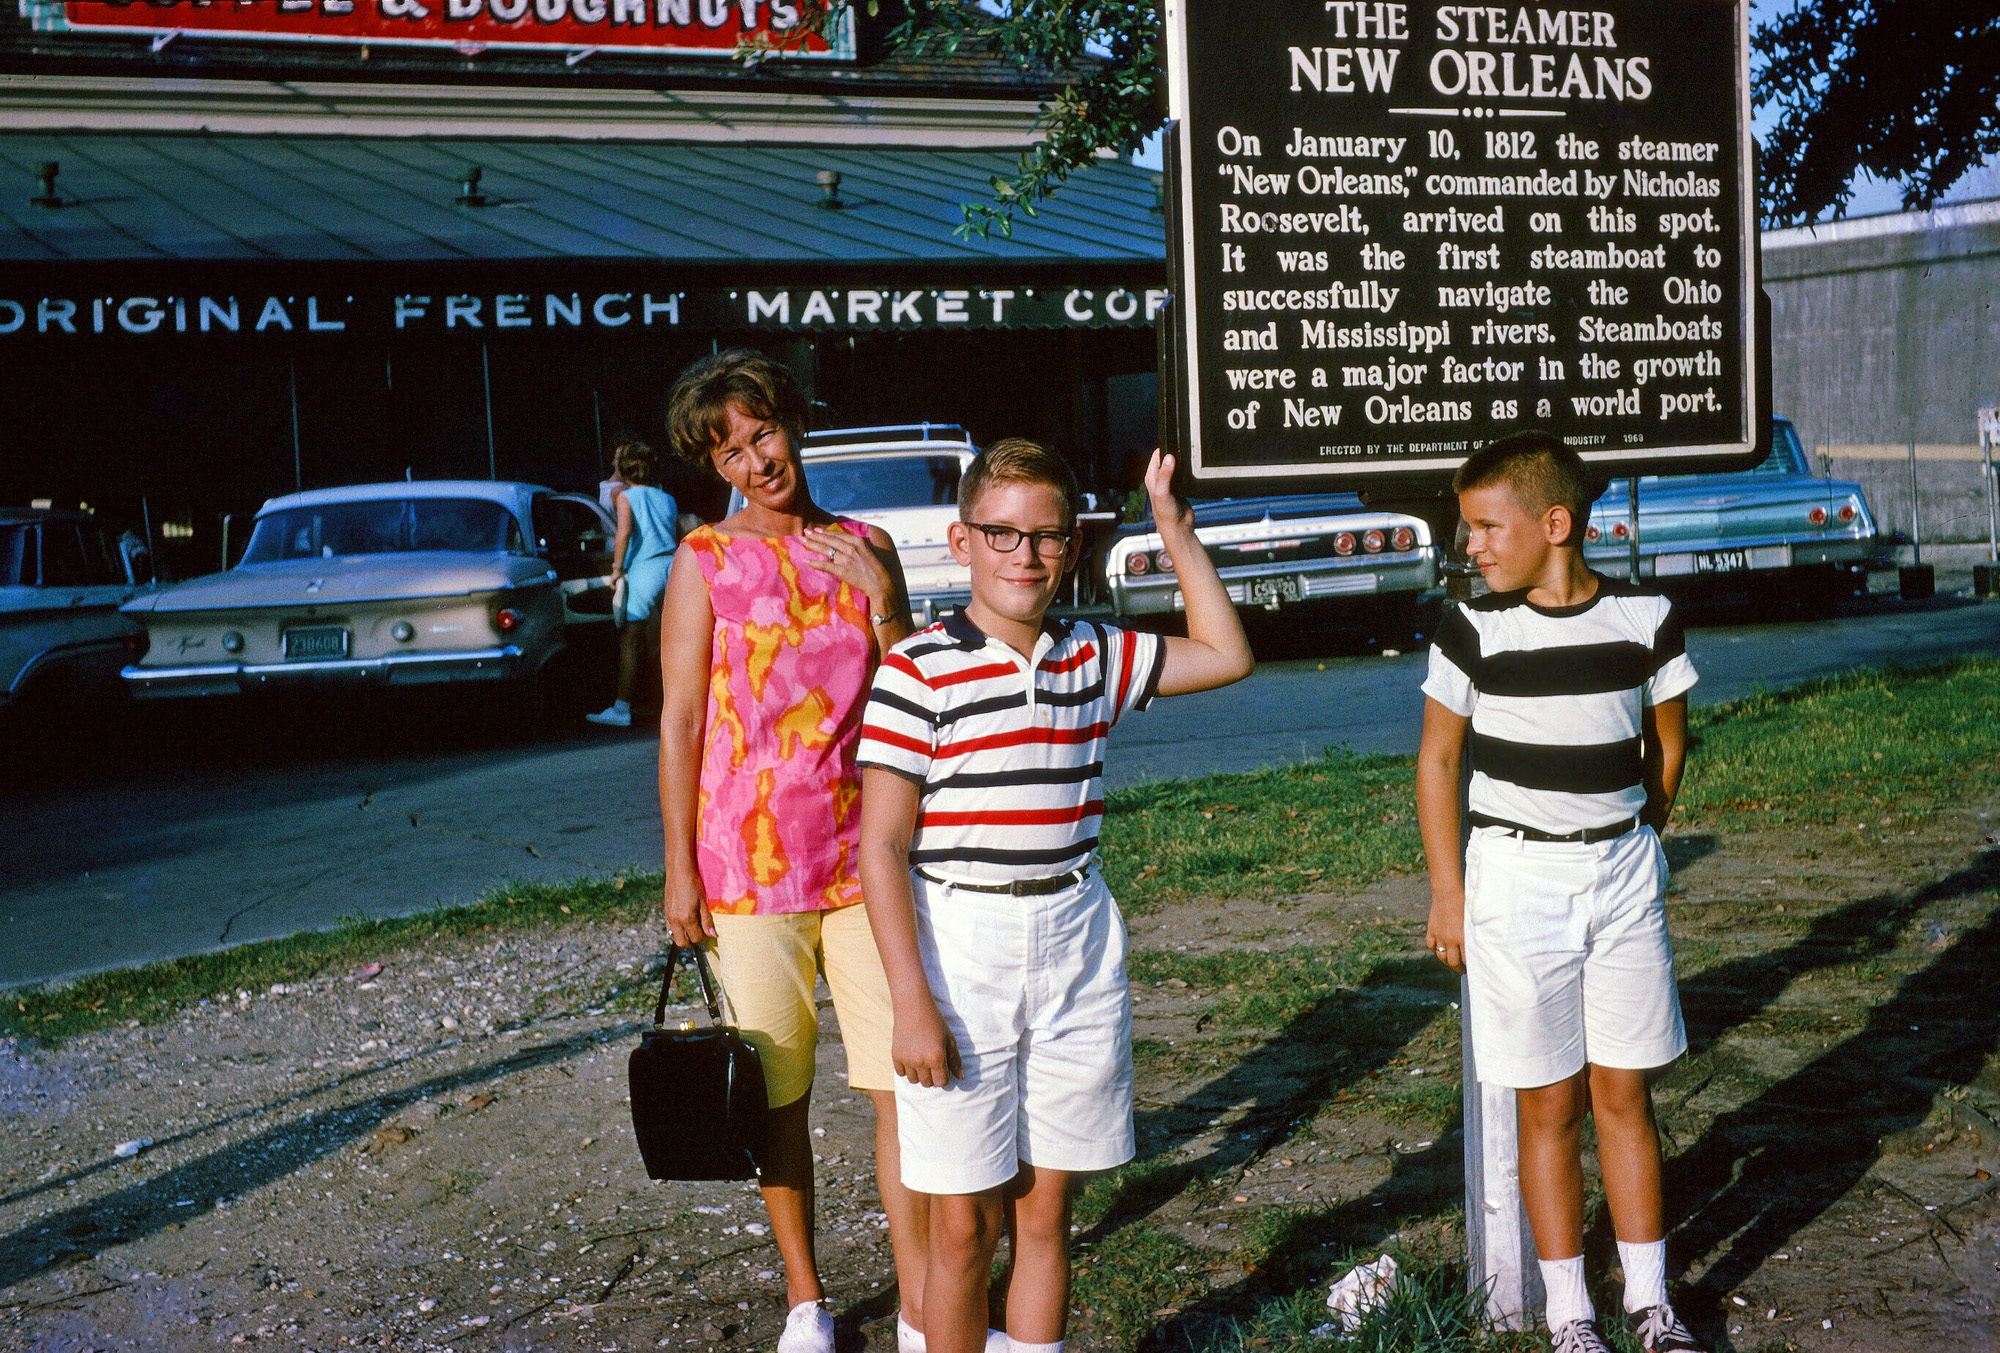 Here are my mom, me (wearing the hated glasses) and my brother Jeffrey again; this time in front of the Café Du Monde in New Orleans; probably taken in 1964. We'd drive over from Houma, where we then lived, and spend the weekends. The New Orleans farmer's market was a fun place to visit in those days; we'd go there after a trip to the Audubon Park Zoo. Point me toward the beignets, please!

After having our fill of powdery donuts and chicory coffee, we'd wander through the French Quarter until evening, then we'd have dinner in an Italian place called, I believe, Madame Turchi's or Turci's. It had the best spaghetti and meatballs I've ever had, before or since. The lady who owned it evidently had been an opera singer at one time long before and she and my mom were great friends. Wonderful days! View full size.


